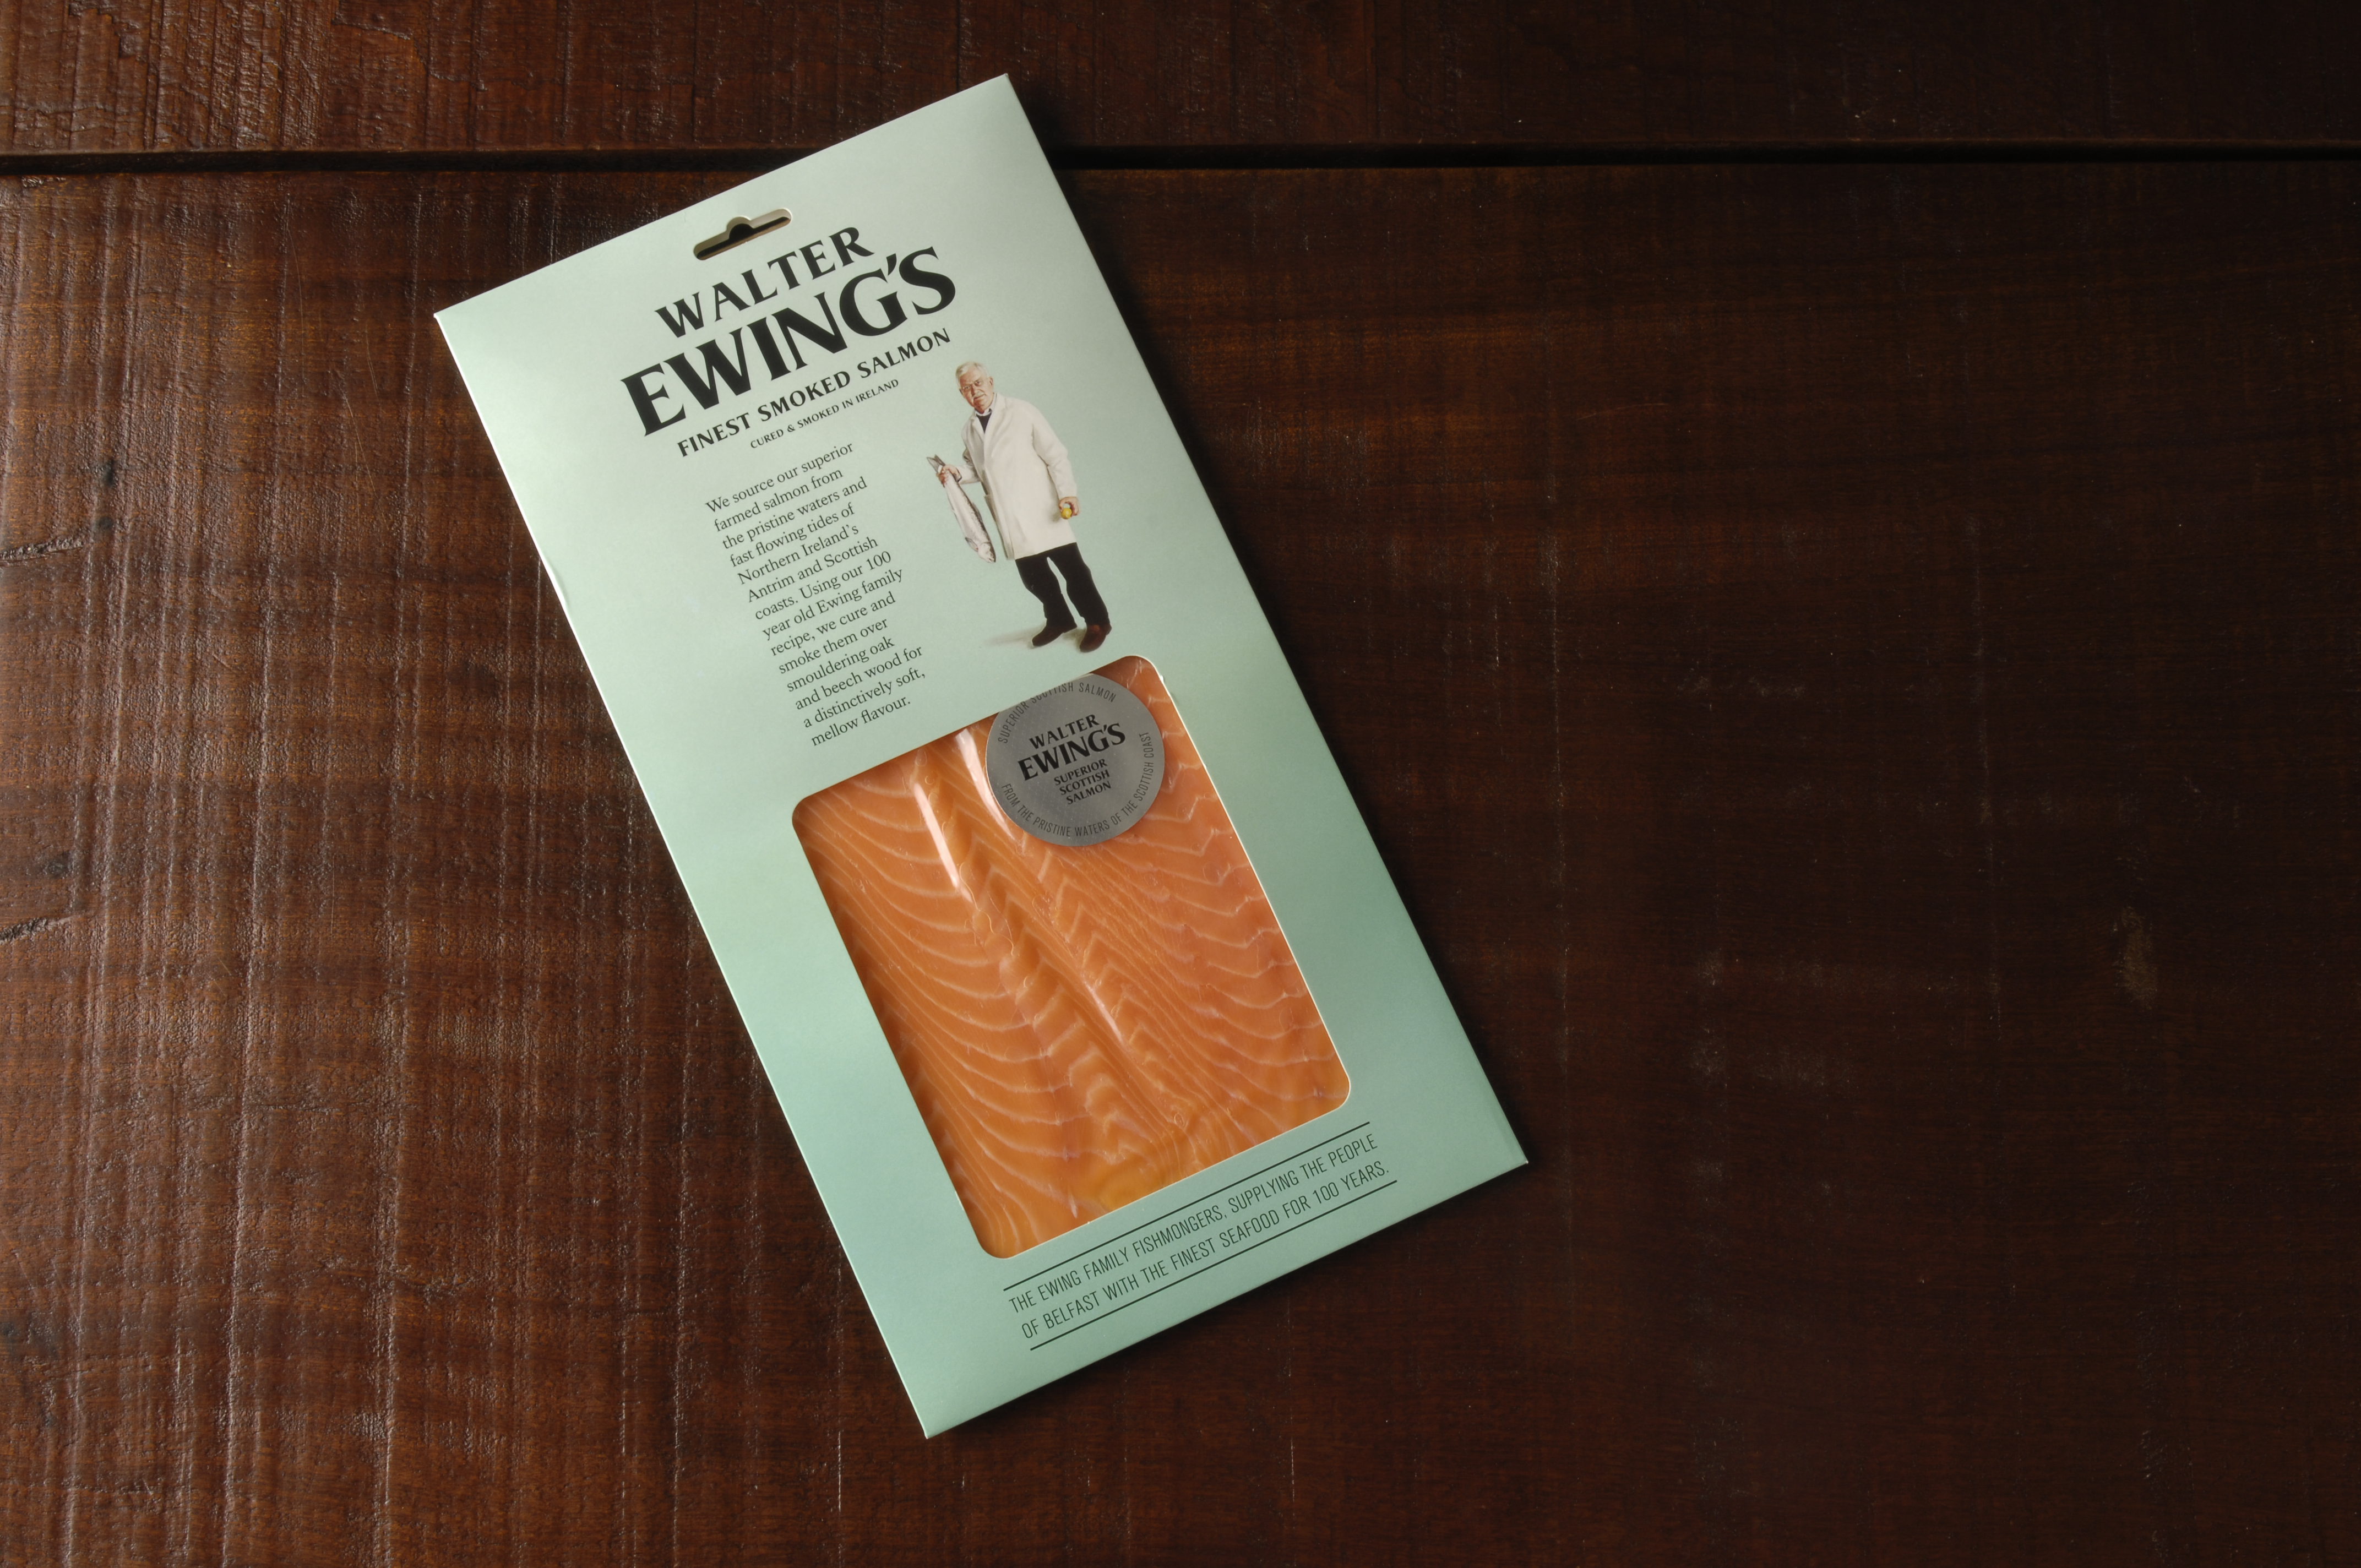 Ewing’s Seafoods image 1